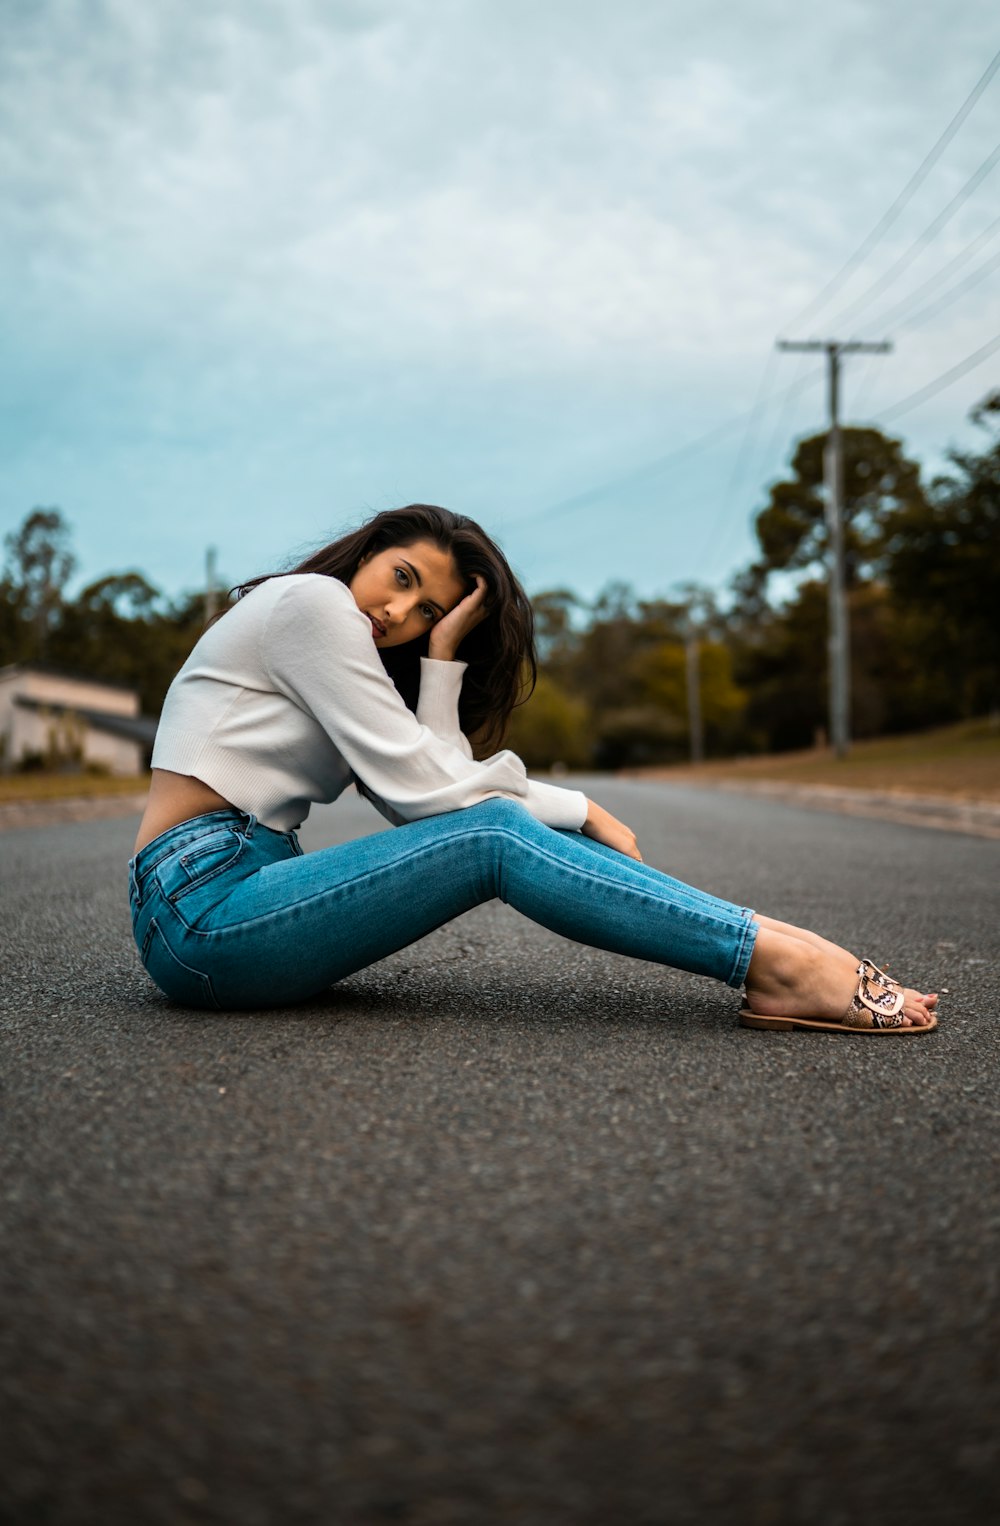 woman in white long sleeve shirt and blue denim jeans sitting on road during daytime